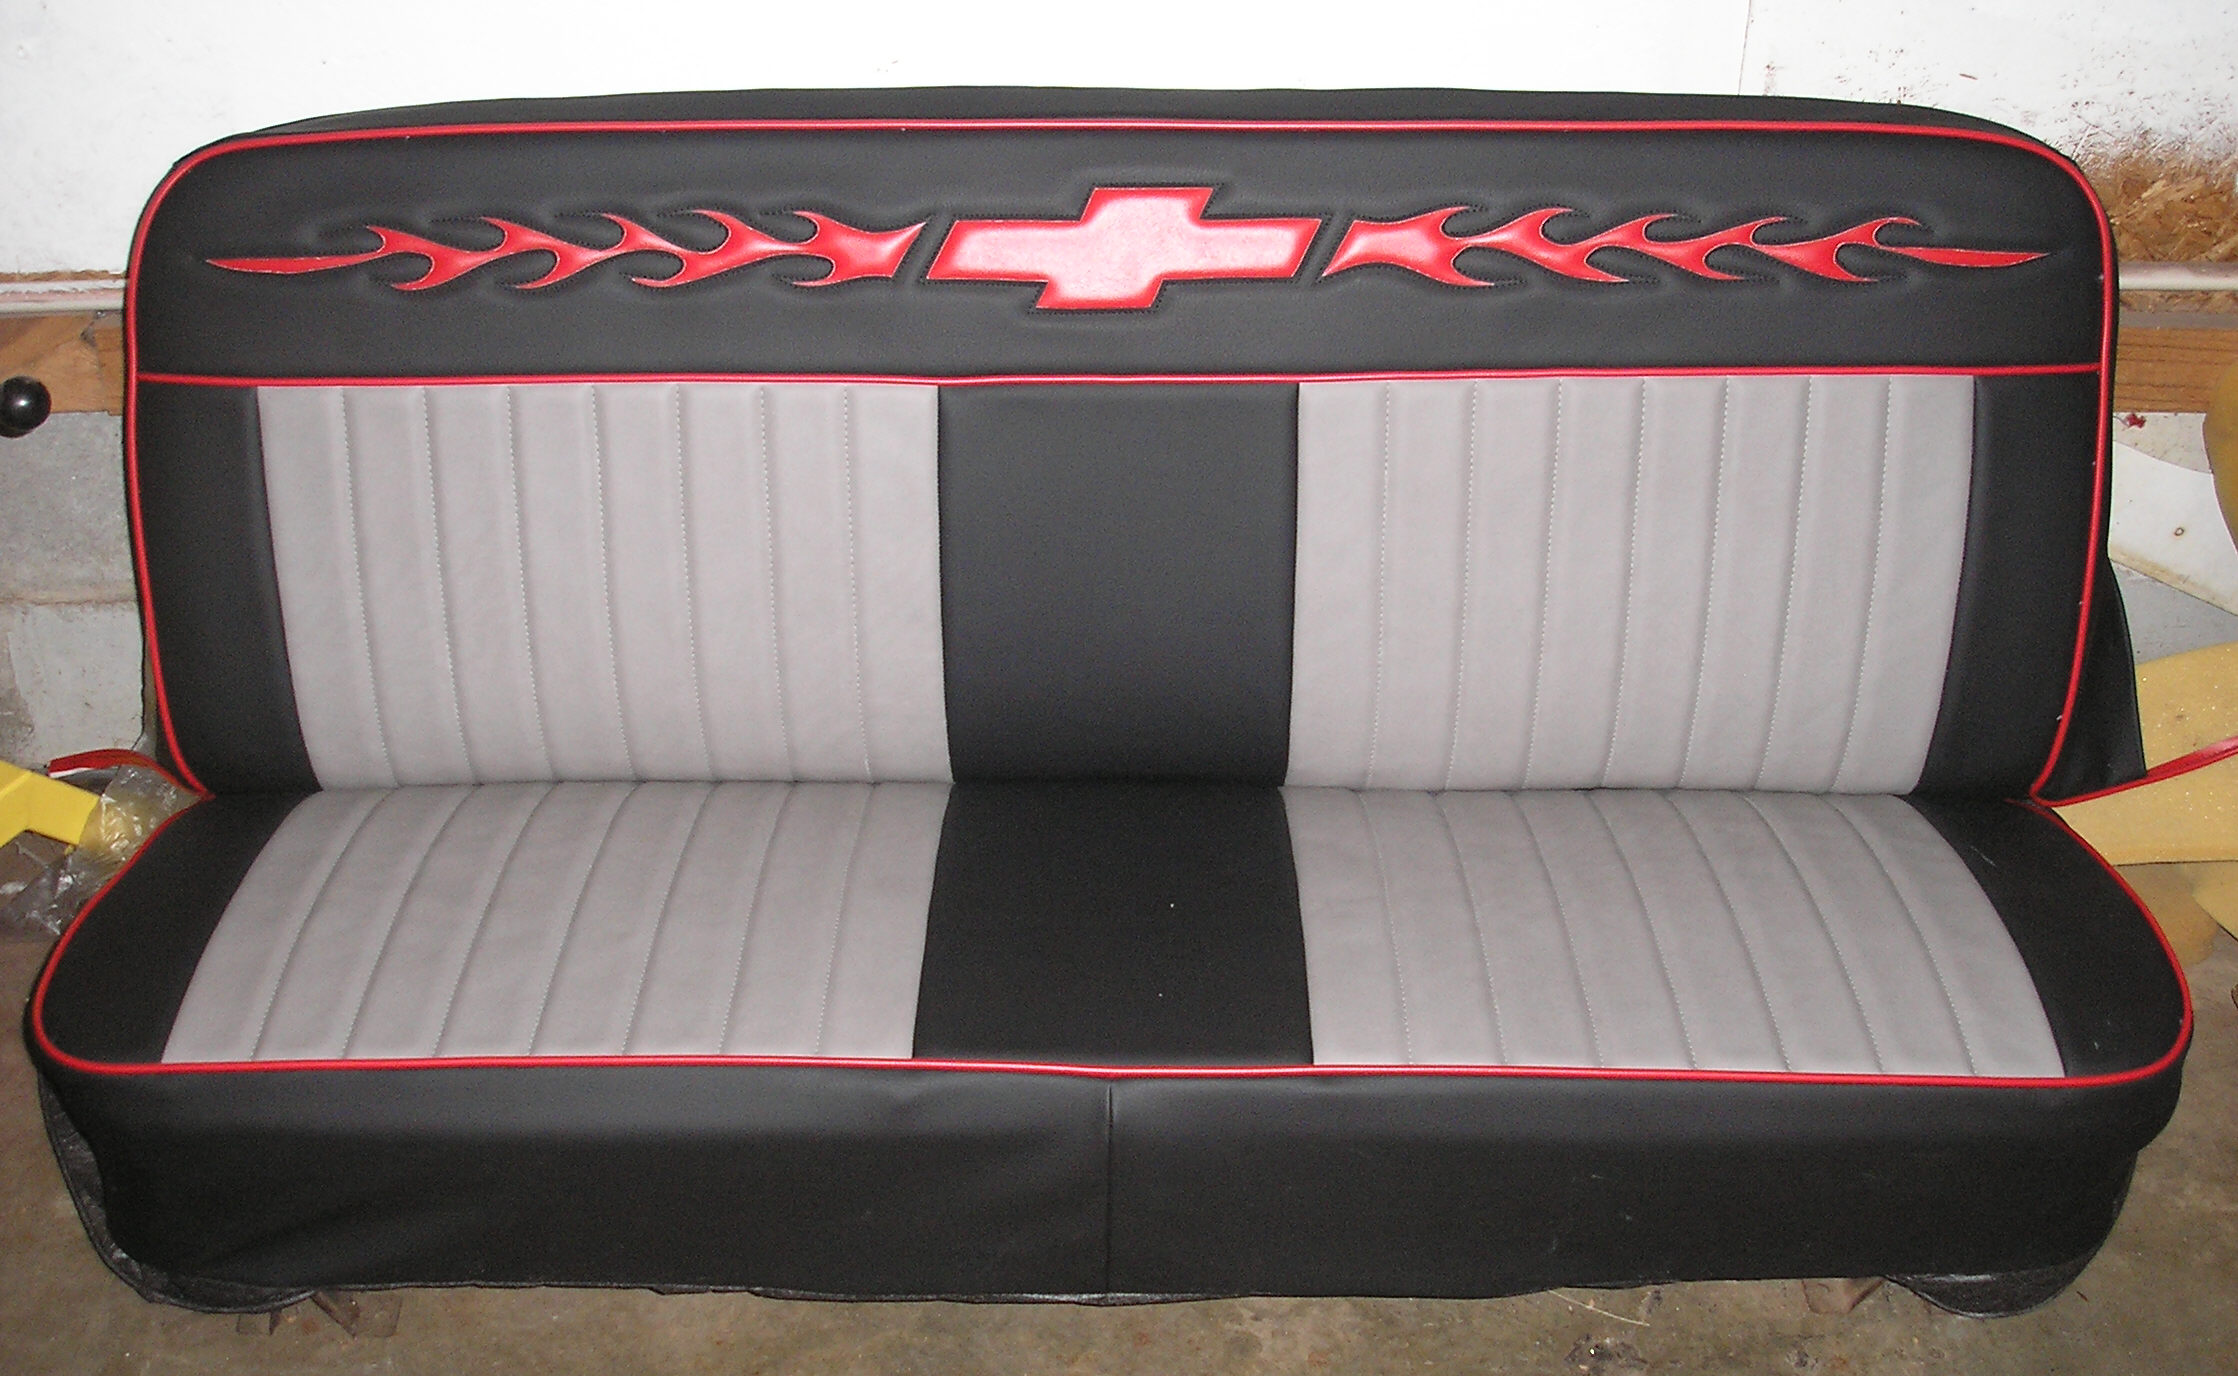 67-72 Chevy Truck Funny Flames Seat Covers https://ricksupholstery.com/truckseatcovers12.html